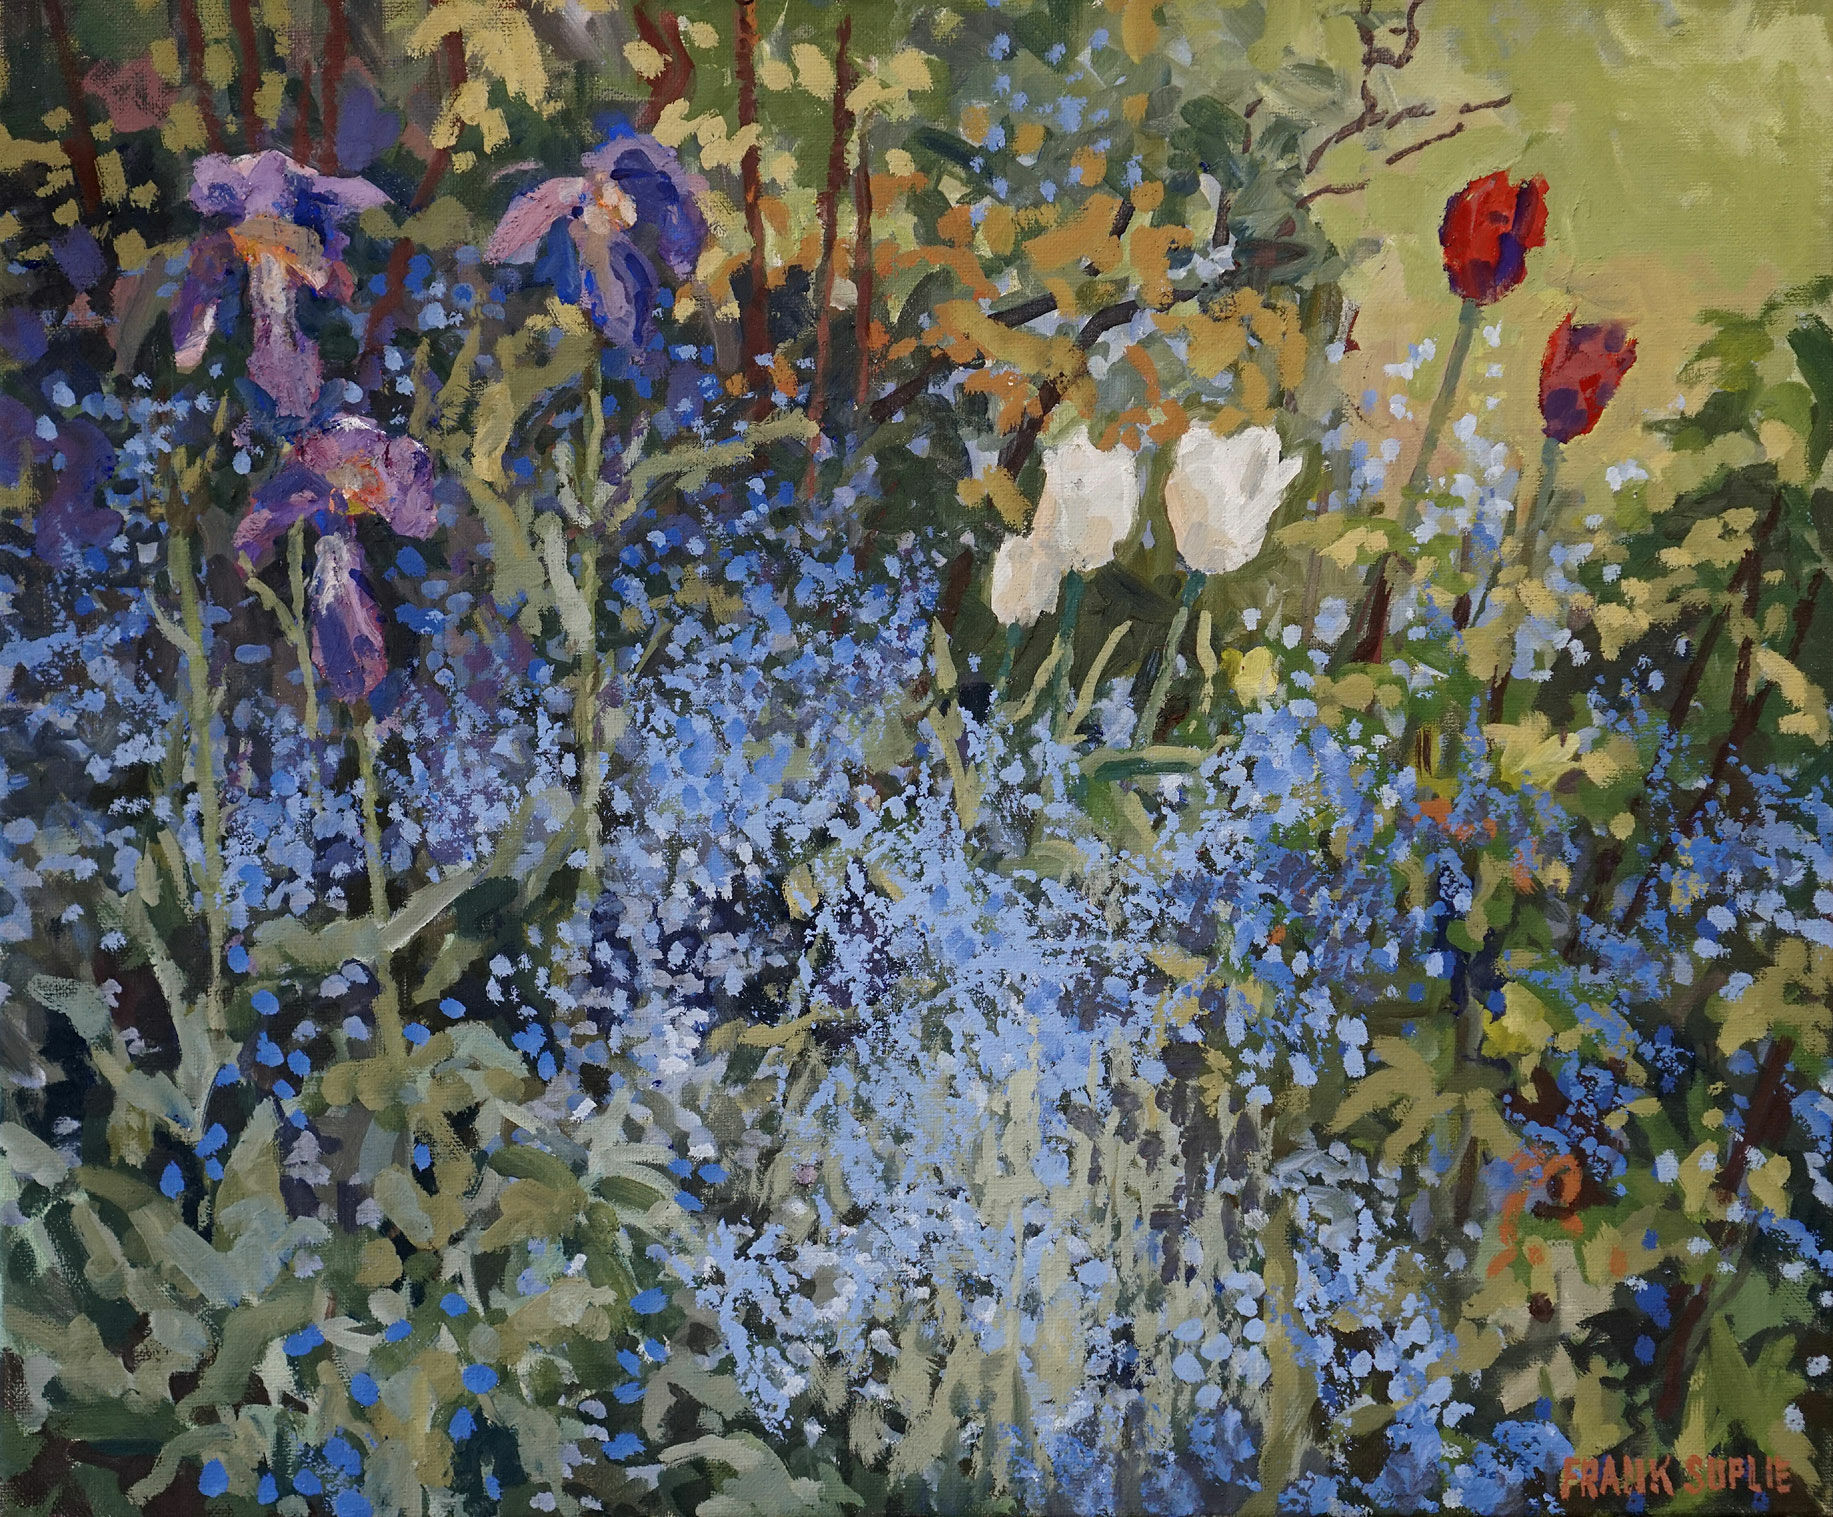 Picture " Forget-Me-Not, Iris and Tulips" (2020) (Original / Unique piece), on stretcher frame by Frank Suplie